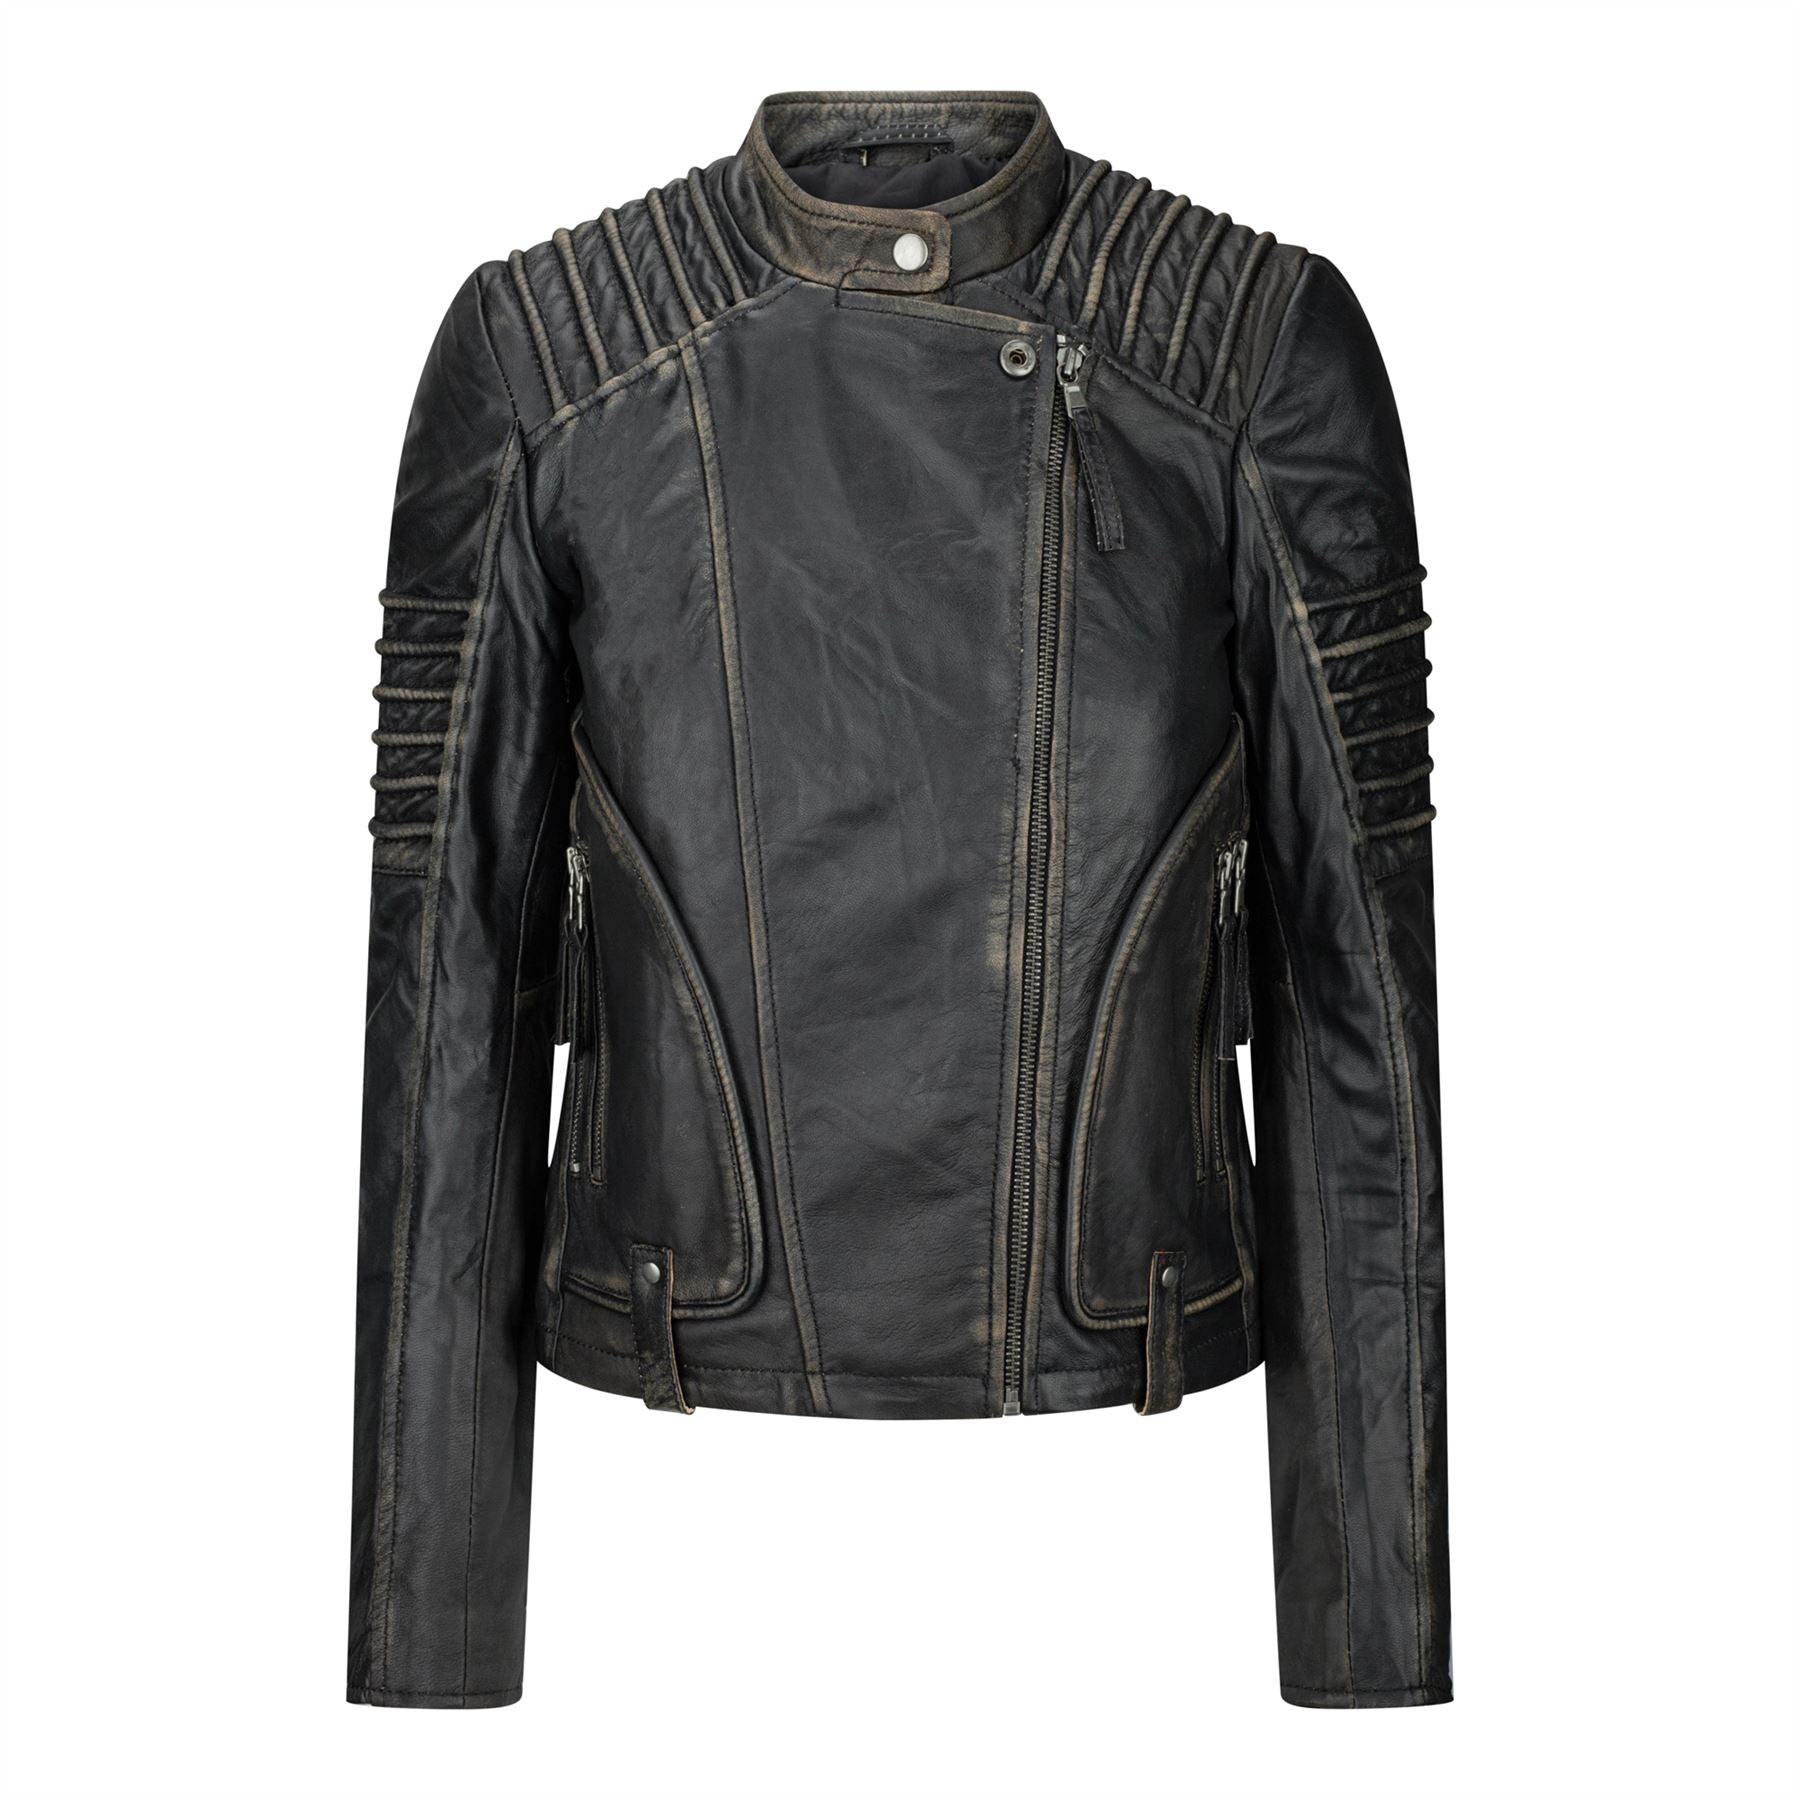 Womens Ladies Girls Soft Black Gold Real Leather Short Biker Style Jacket - Knighthood Store